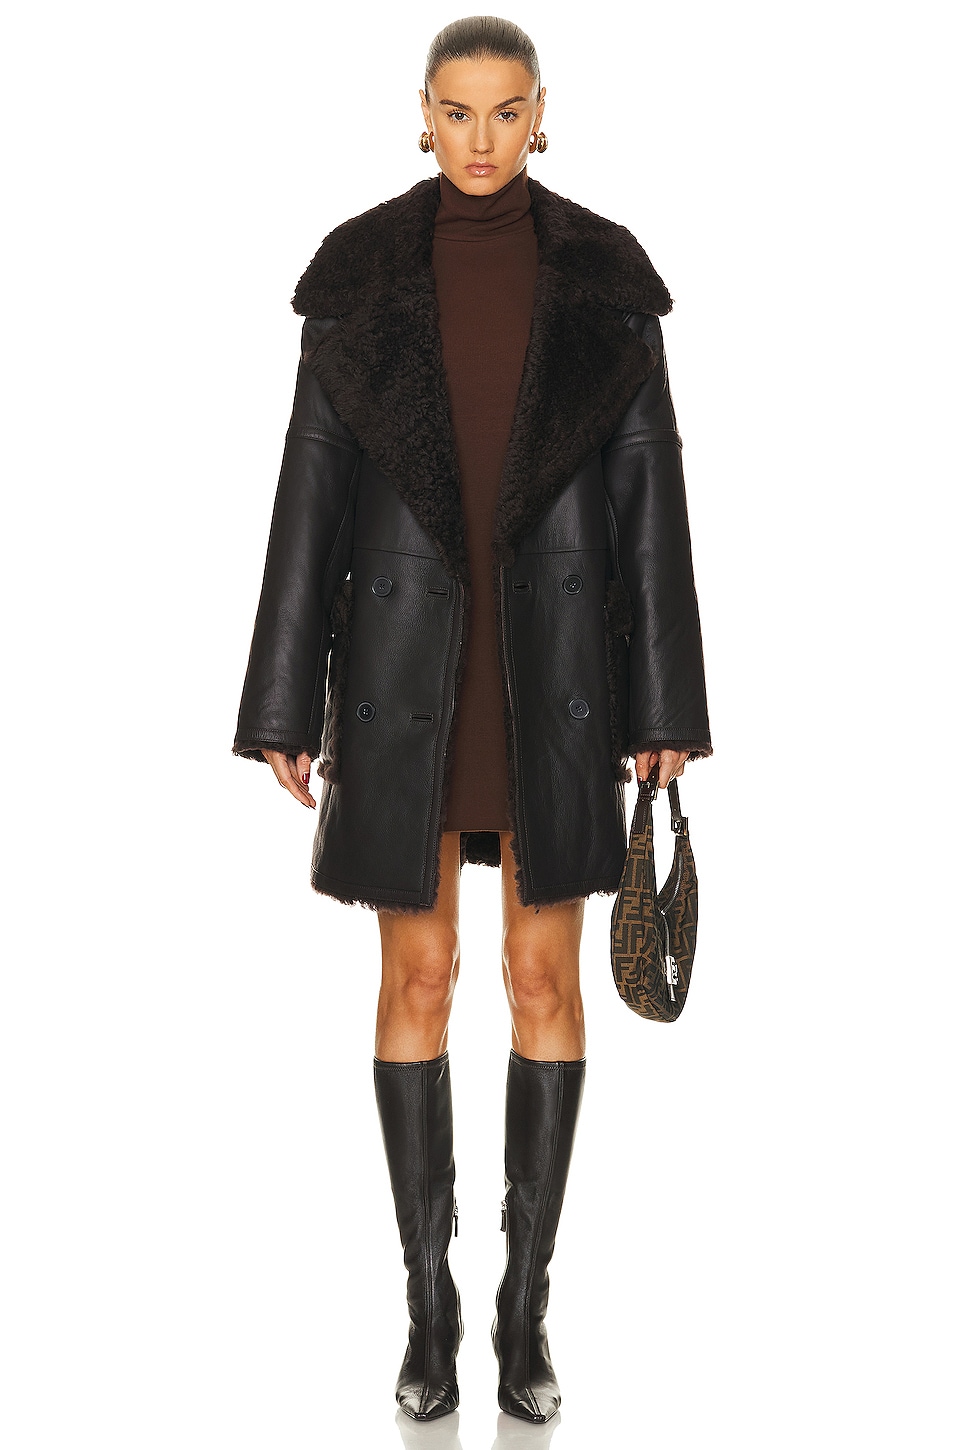 Image 1 of Citizens of Humanity Elodie Shearling Coat in Mocha Brown Napa